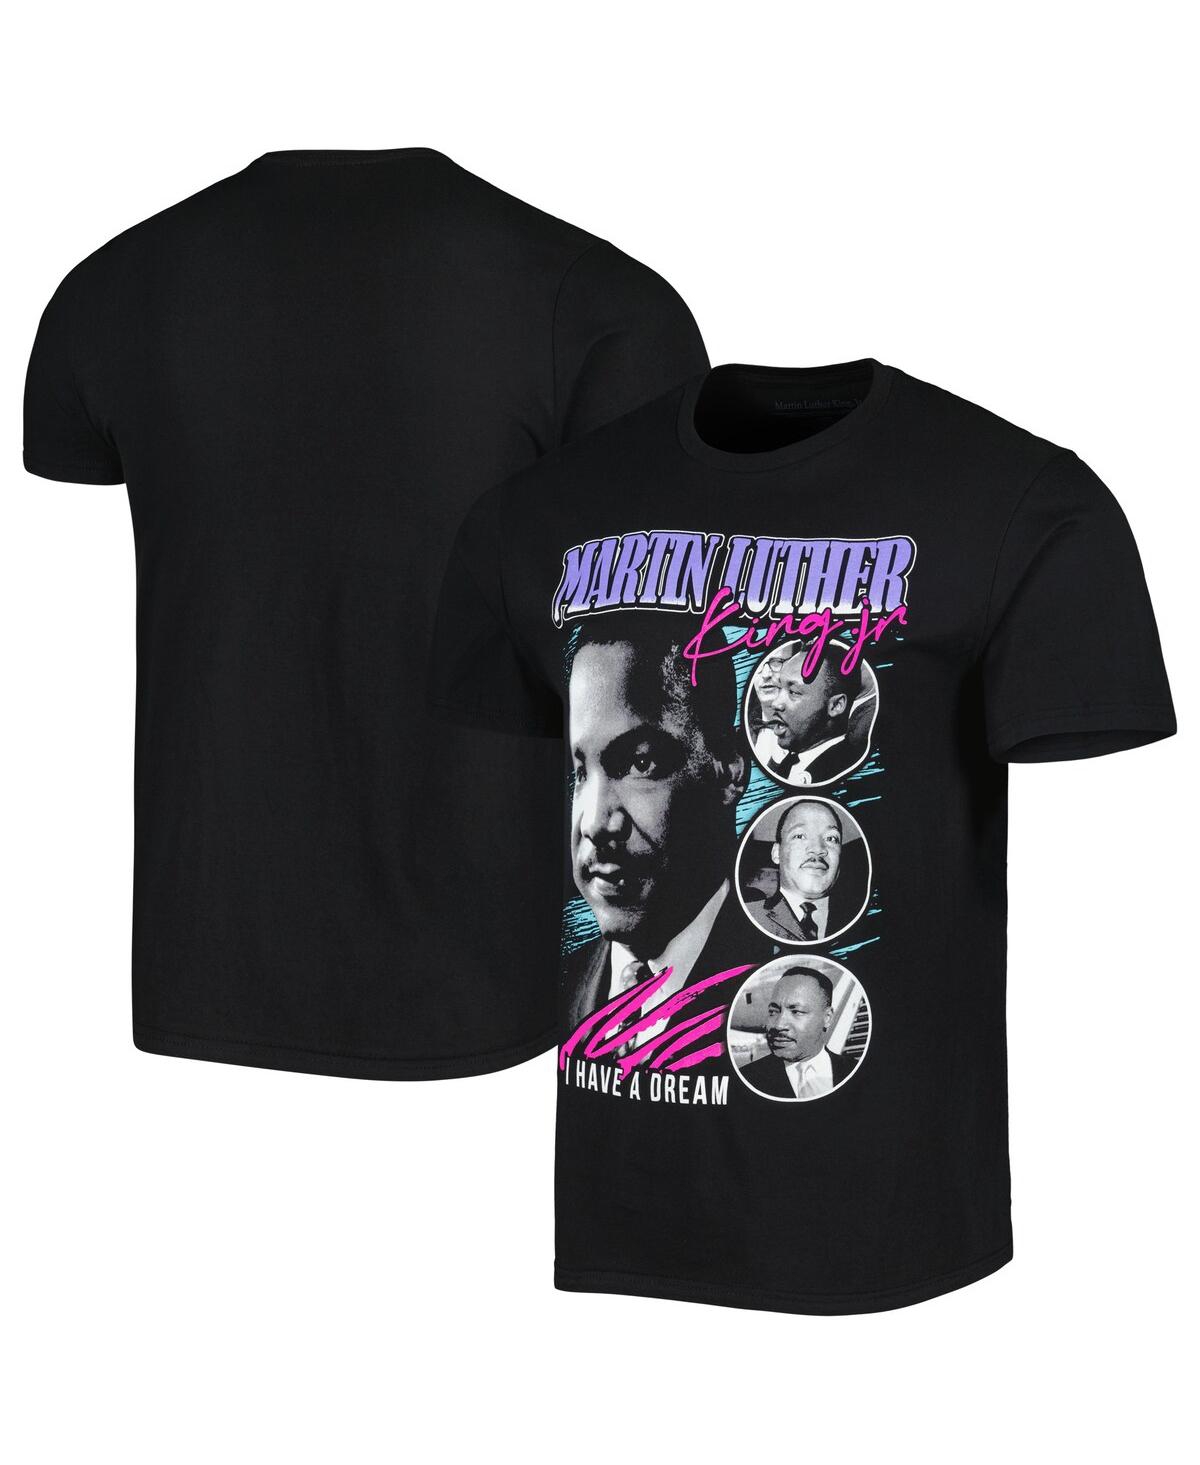 Men's and Women's Black Martin Luther King Jr. Graphic T-shirt - Black